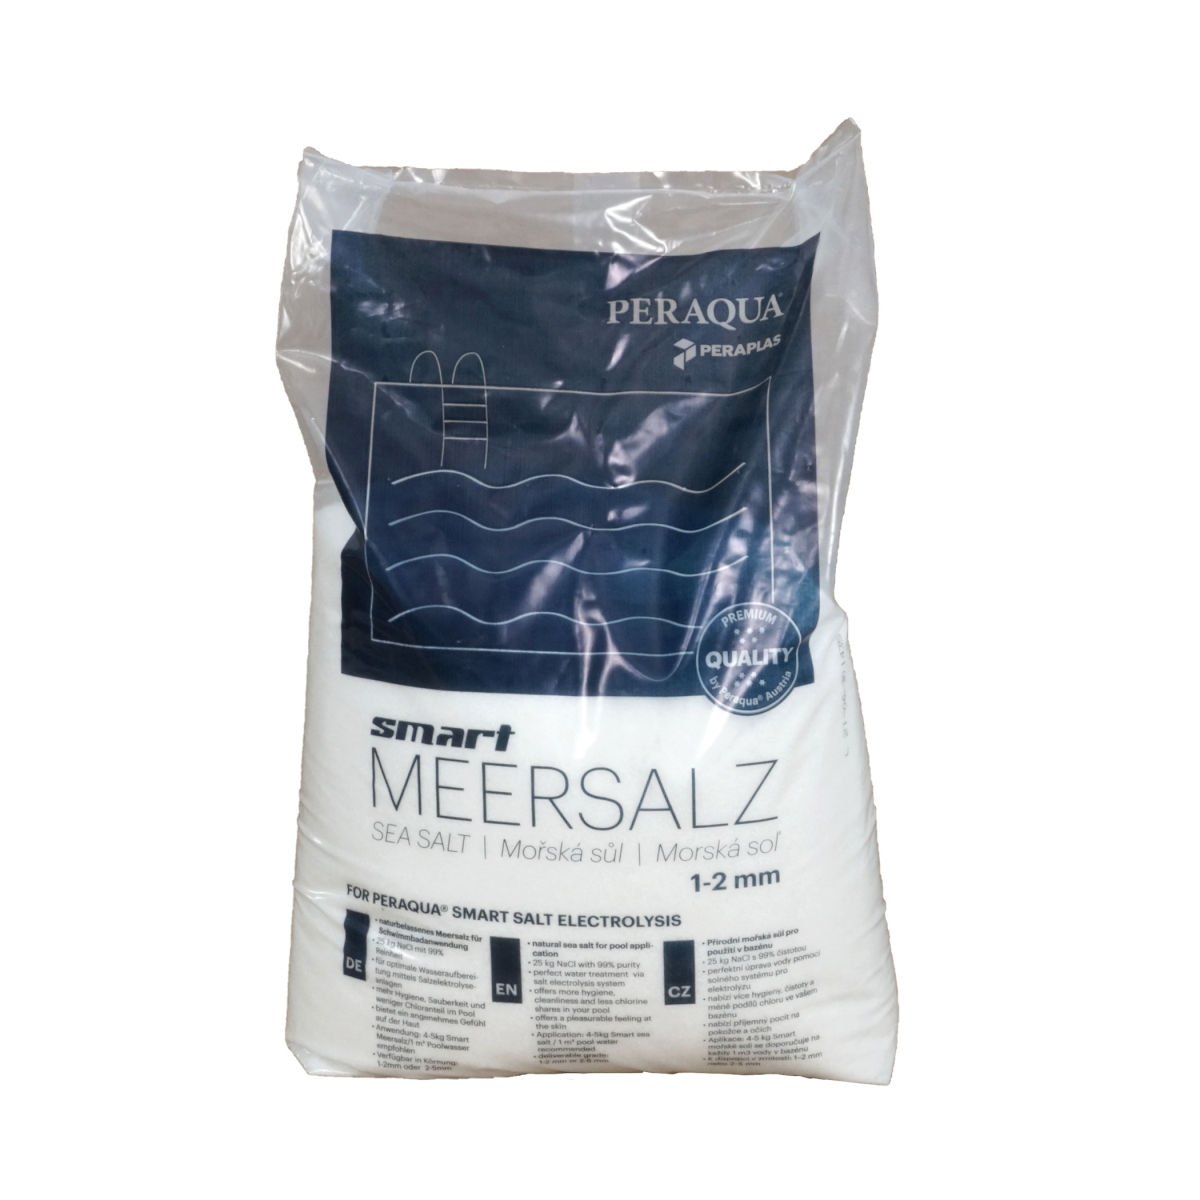 Smart Sea Salt 1-2mm Grade for usage in combination with Saltelectrolysis Systems for pool applications, 25 kg bag Smart Sea Salt 1-2mm Grade for usage in combination with Saltelectrolysis Systems for pool applications, 25 kg bag